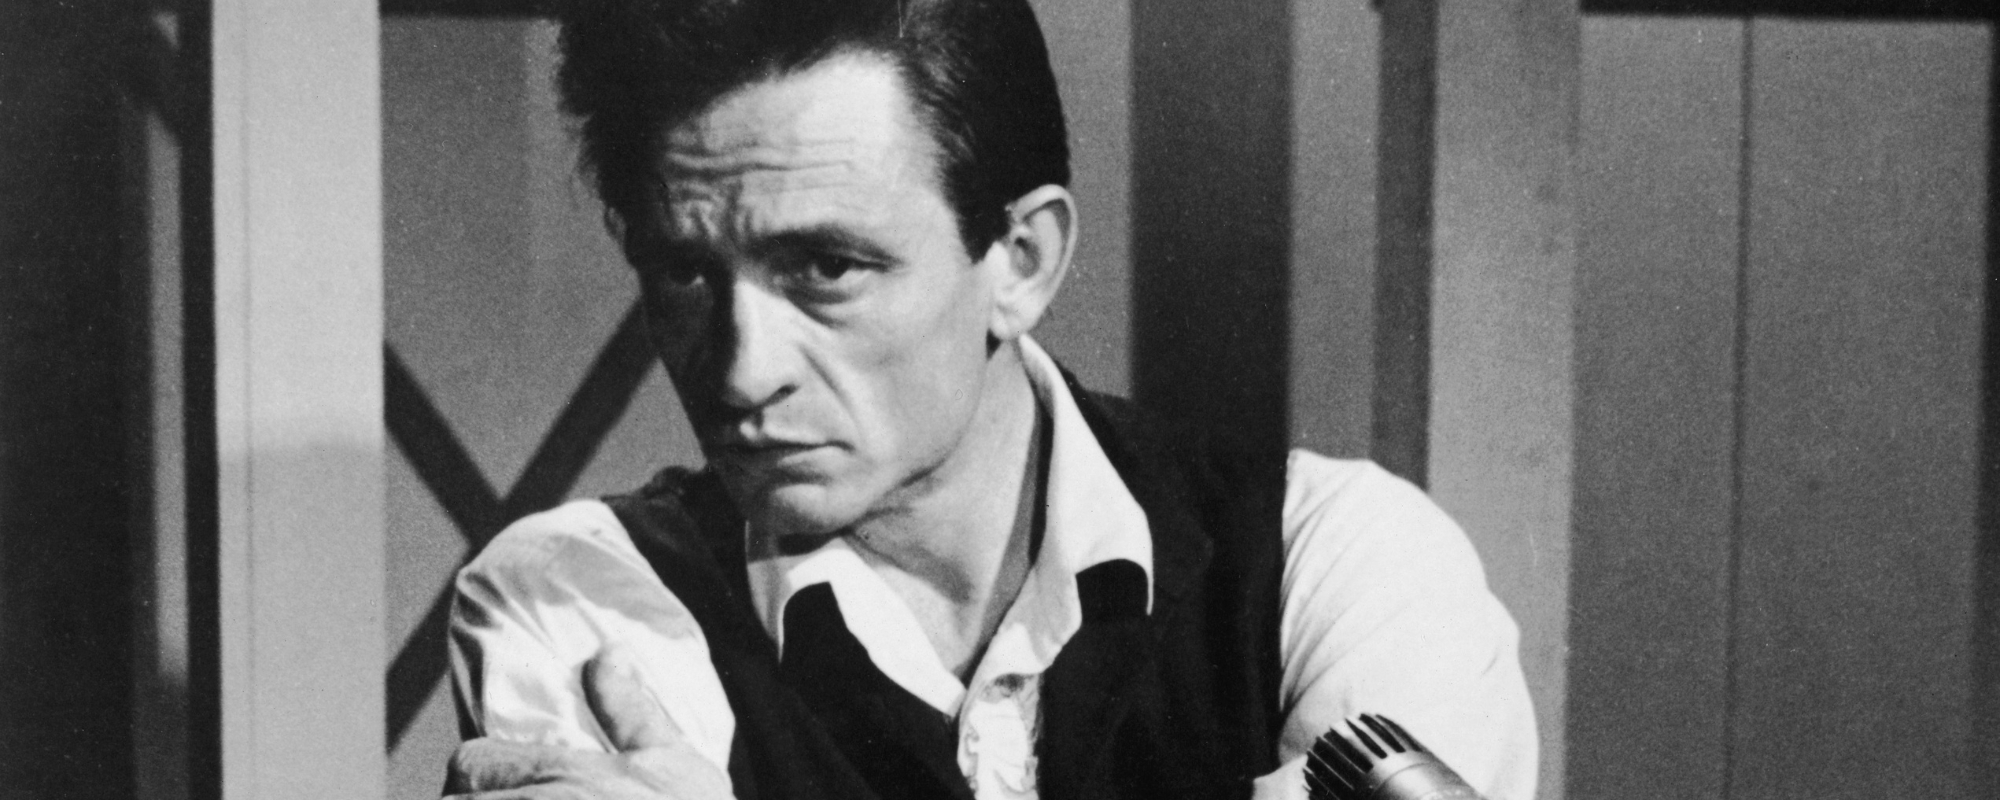 Johnny Cash, Stevie Nicks, & 3 Other Musical Icons’ Approach to Songwriting